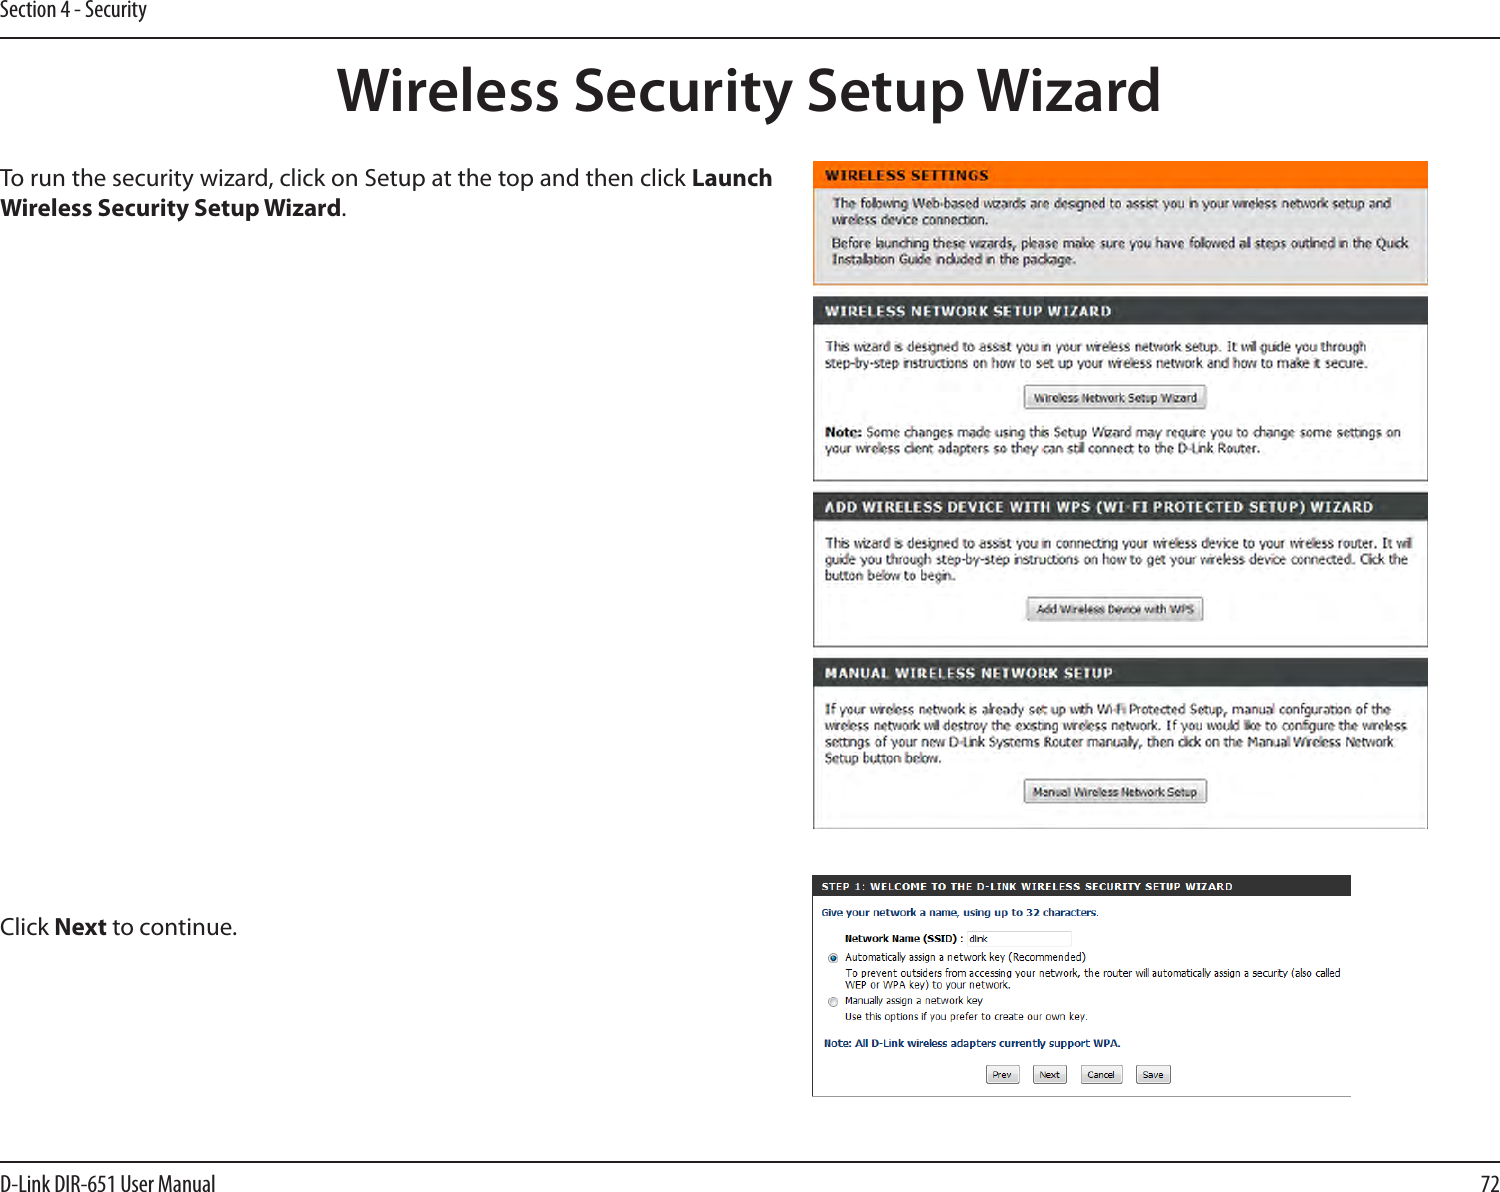 72D-Link DIR-651 User ManualSection 4 - SecurityWireless Security Setup WizardTo run the security wizard, click on Setup at the top and then click Launch Wireless Security Setup Wizard.Click Next to continue.